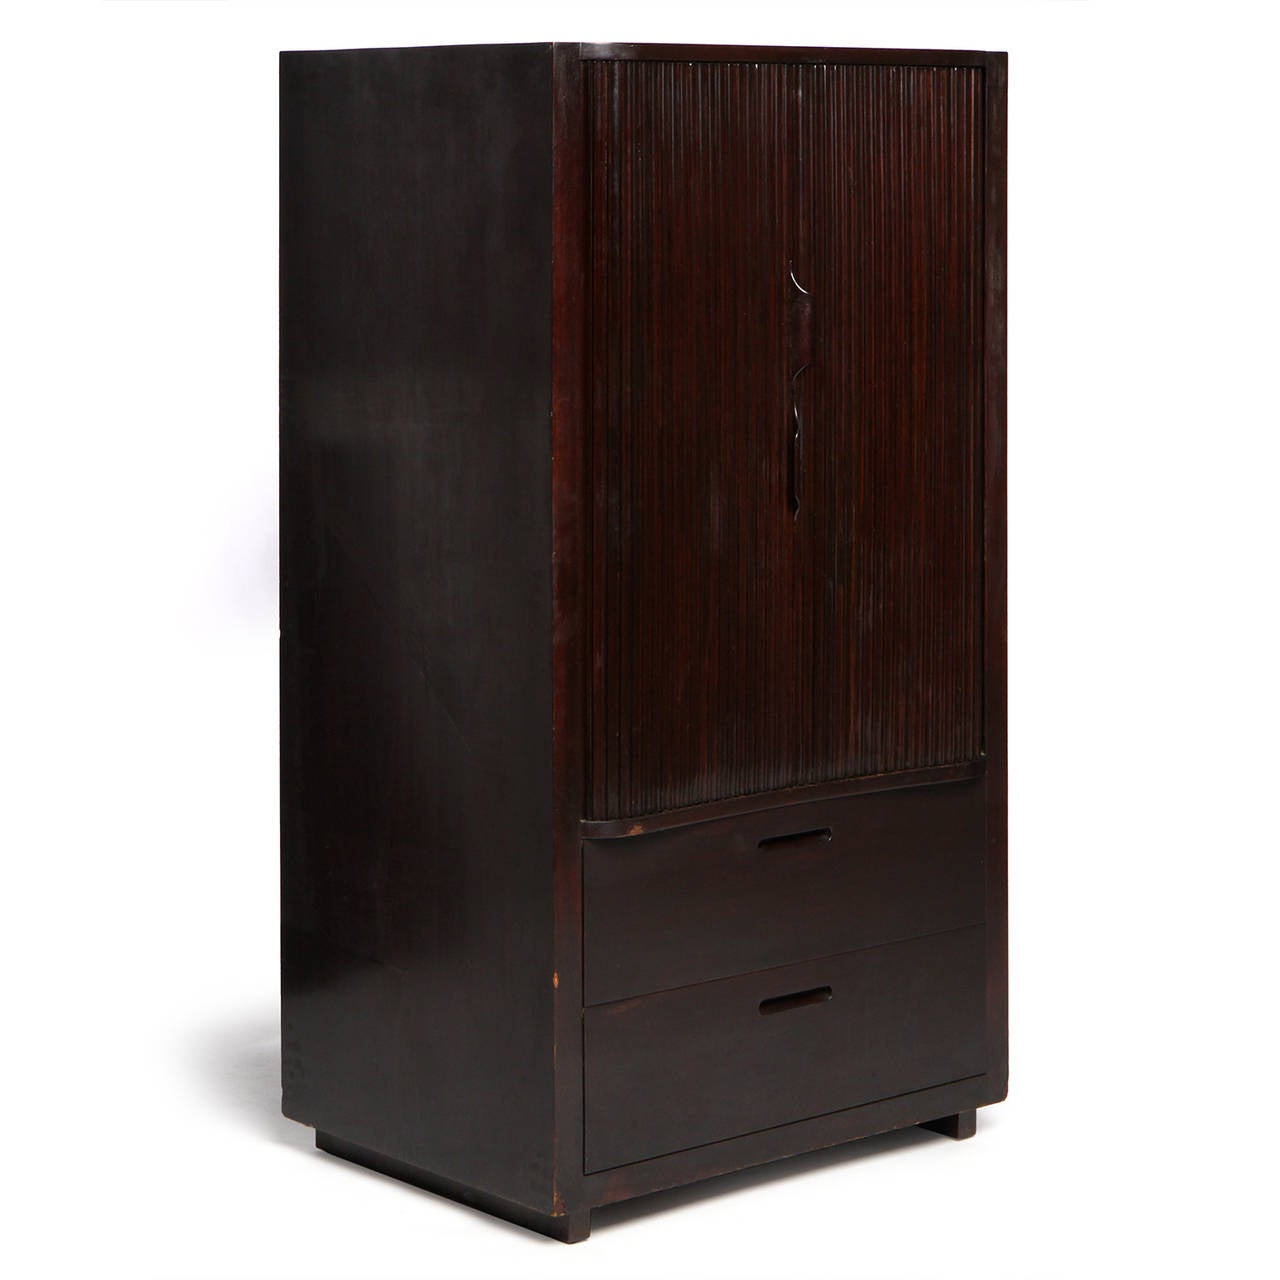 Mid-Century Modern Tall Tambour Cabinet with Drawers by Edward Wormley for Dunbar For Sale